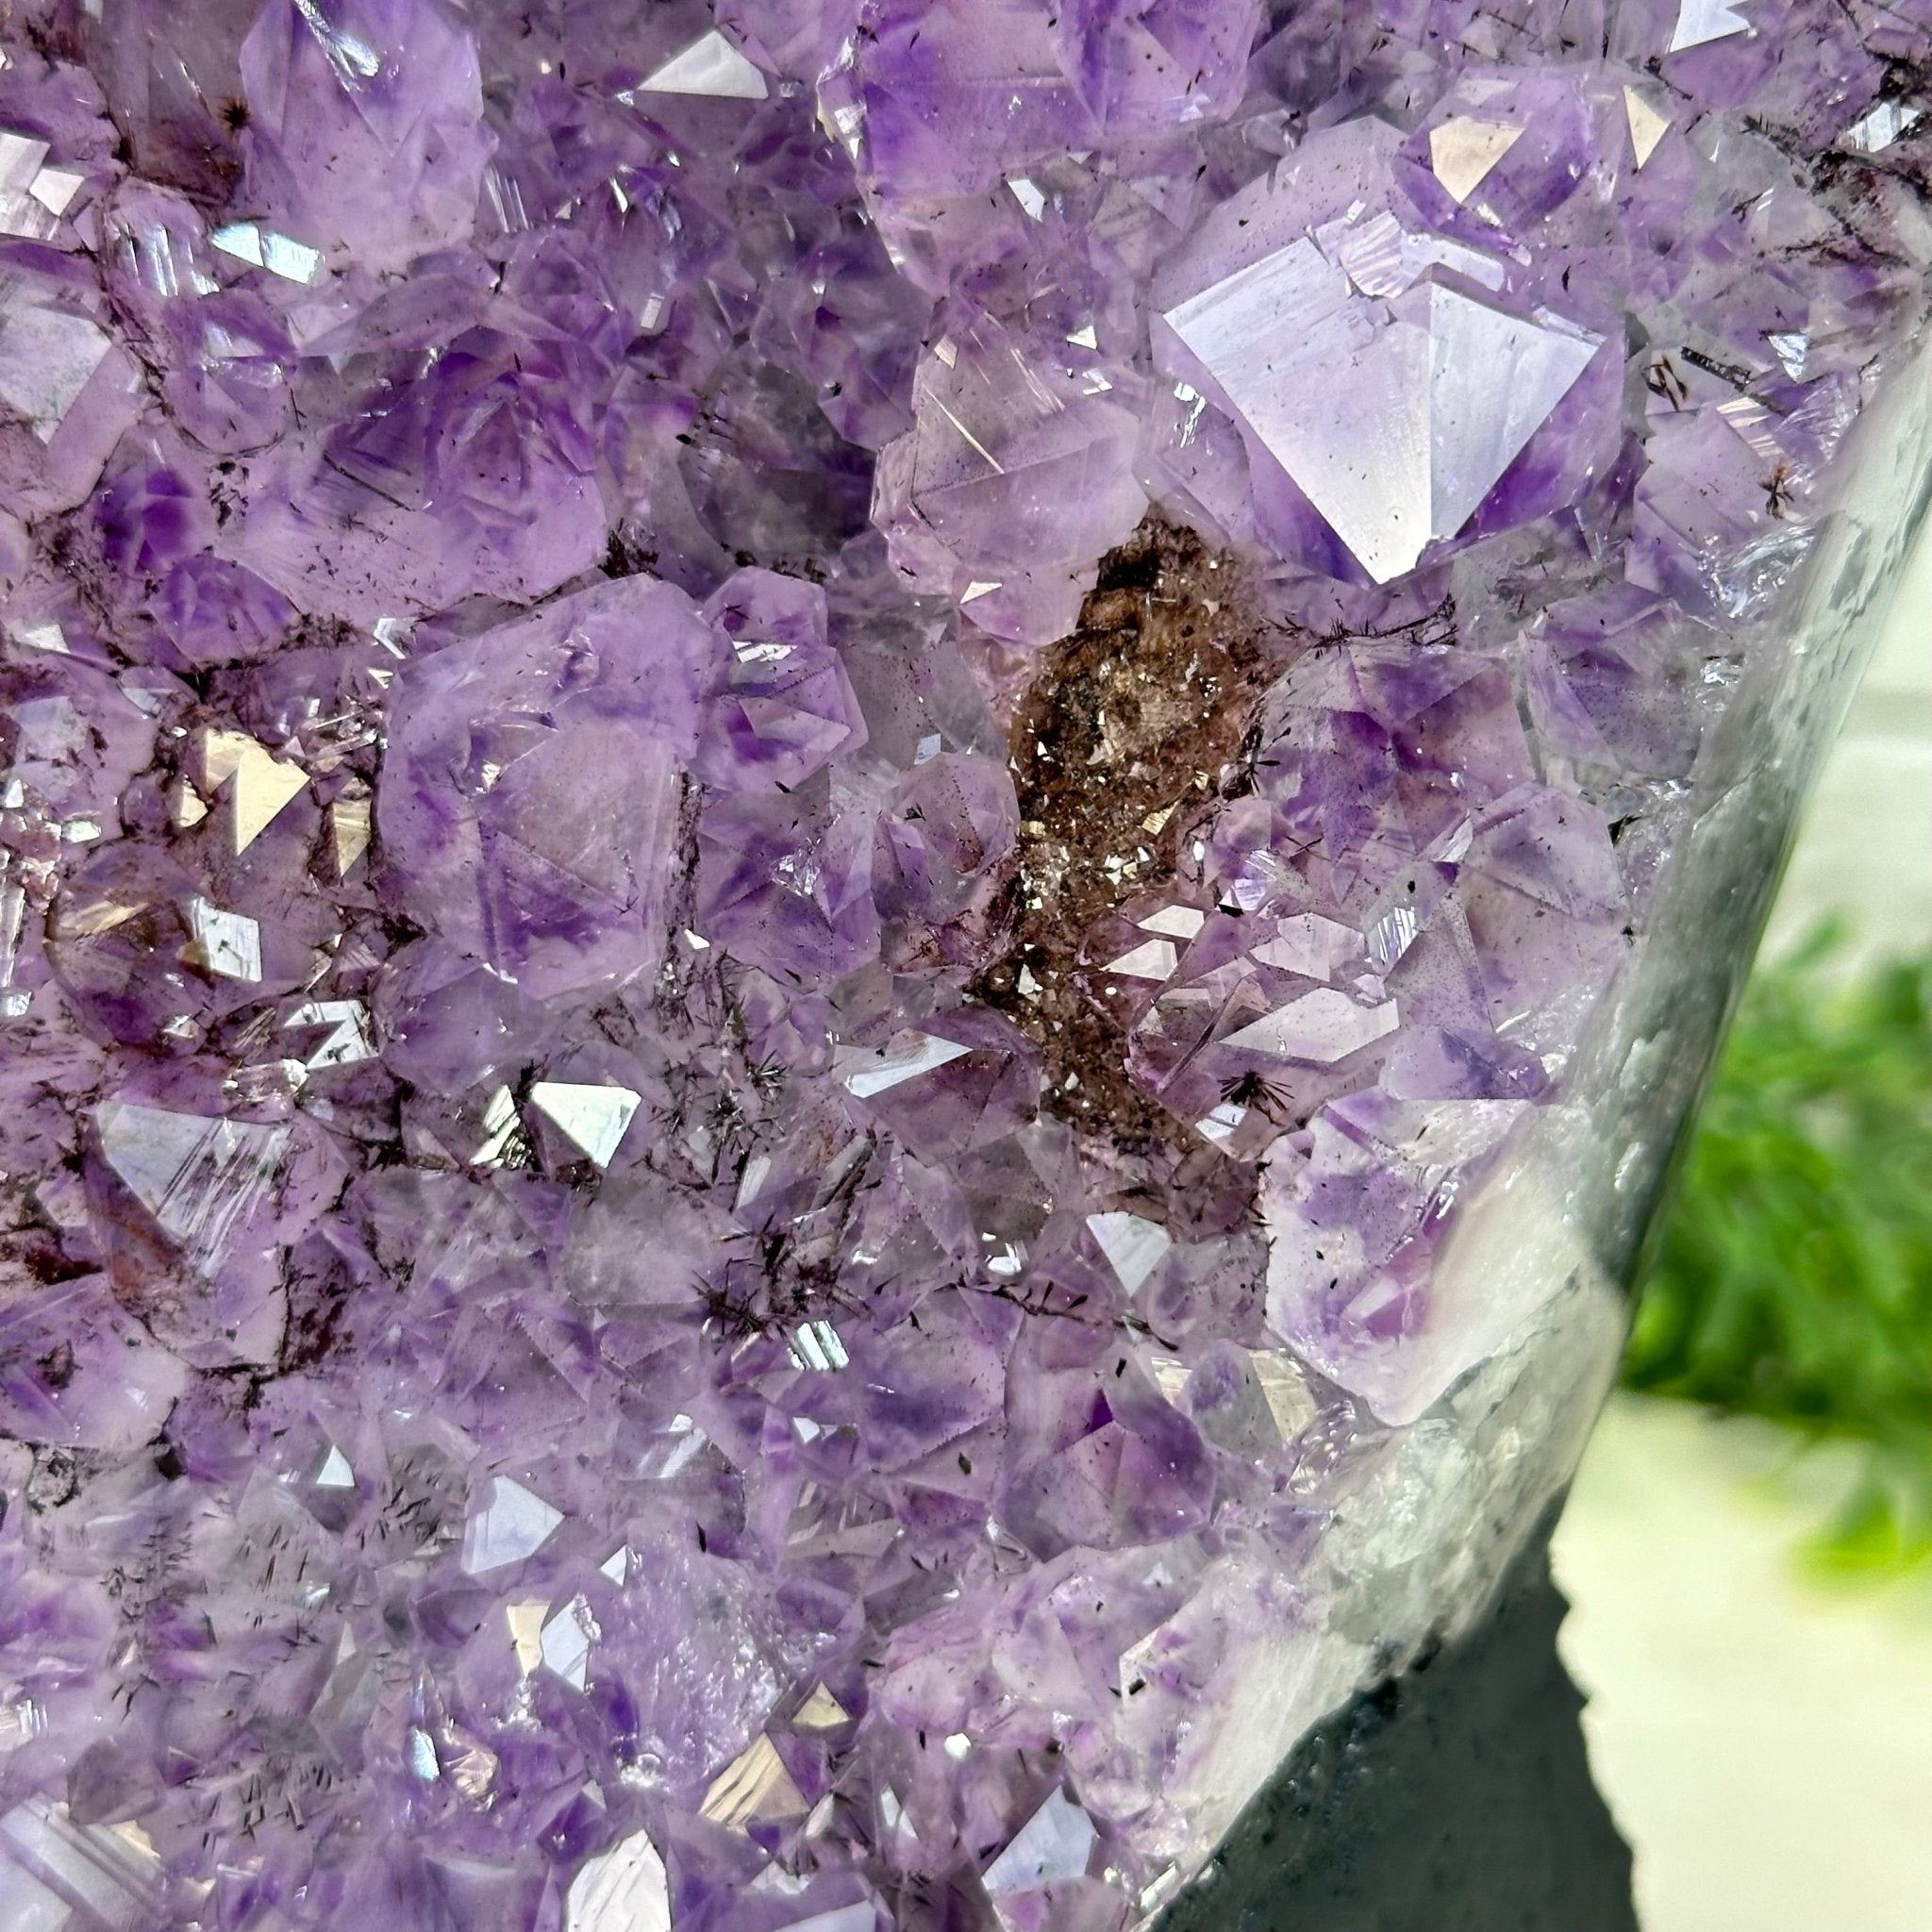 Extra Quality Amethyst Cluster on Cement Base, 12.3 lbs and 10" Tall #5614-0101 - Brazil GemsBrazil GemsExtra Quality Amethyst Cluster on Cement Base, 12.3 lbs and 10" Tall #5614-0101Clusters on Cement Bases5614-0101